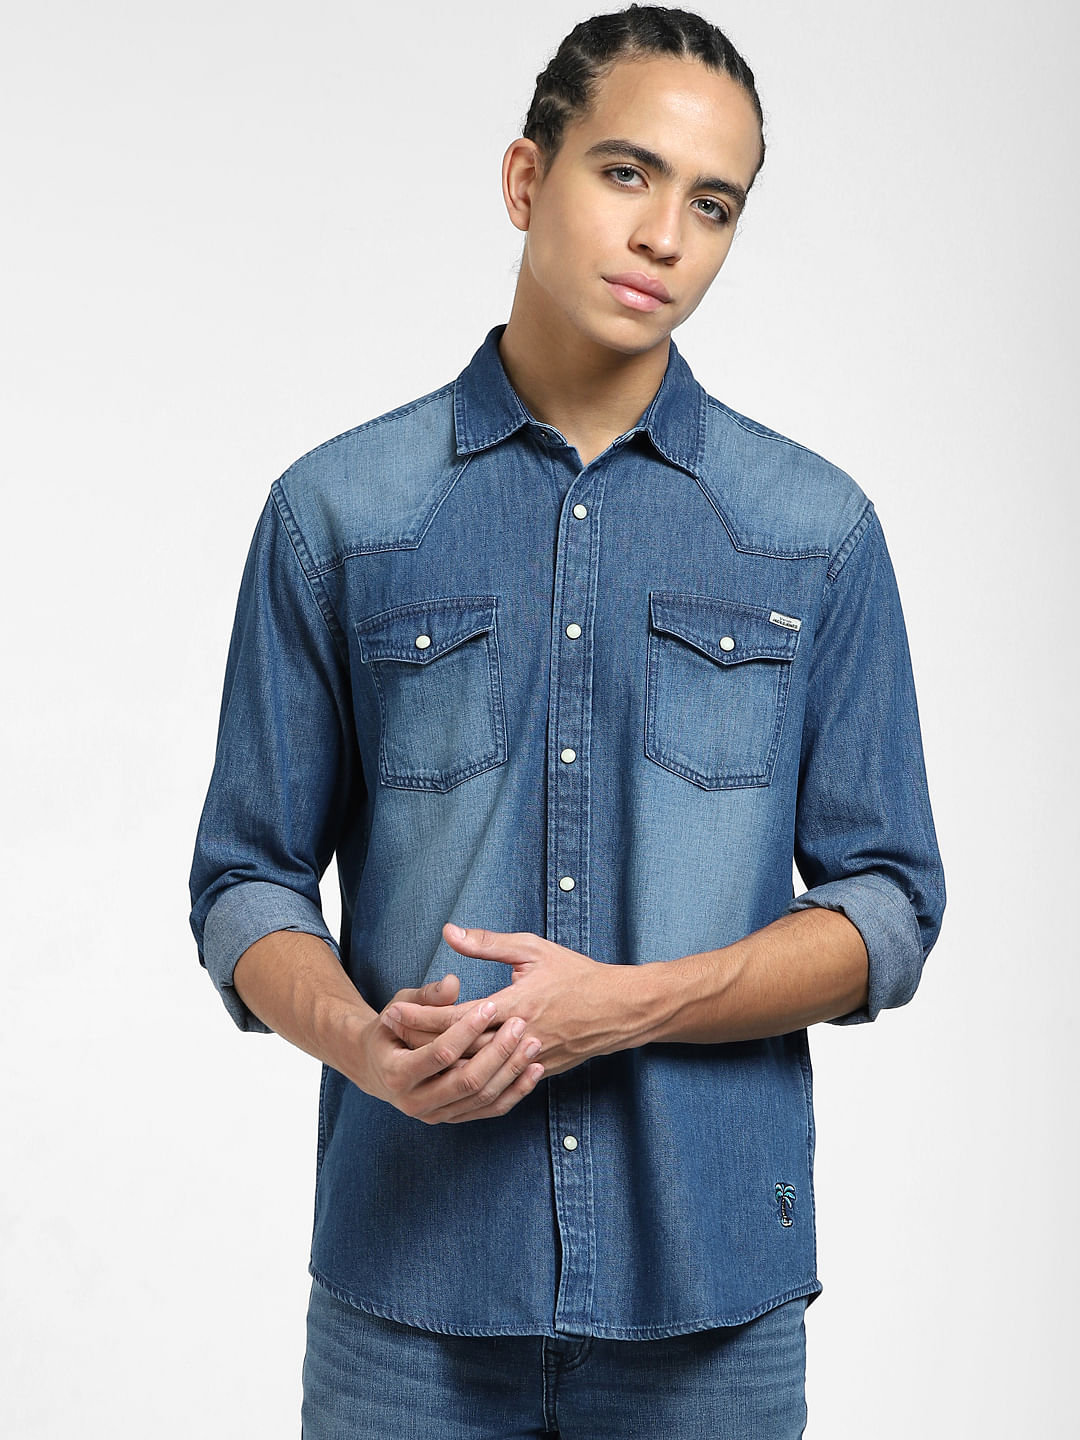 Classic Fit Jean Workwear Shirt | Old Navy